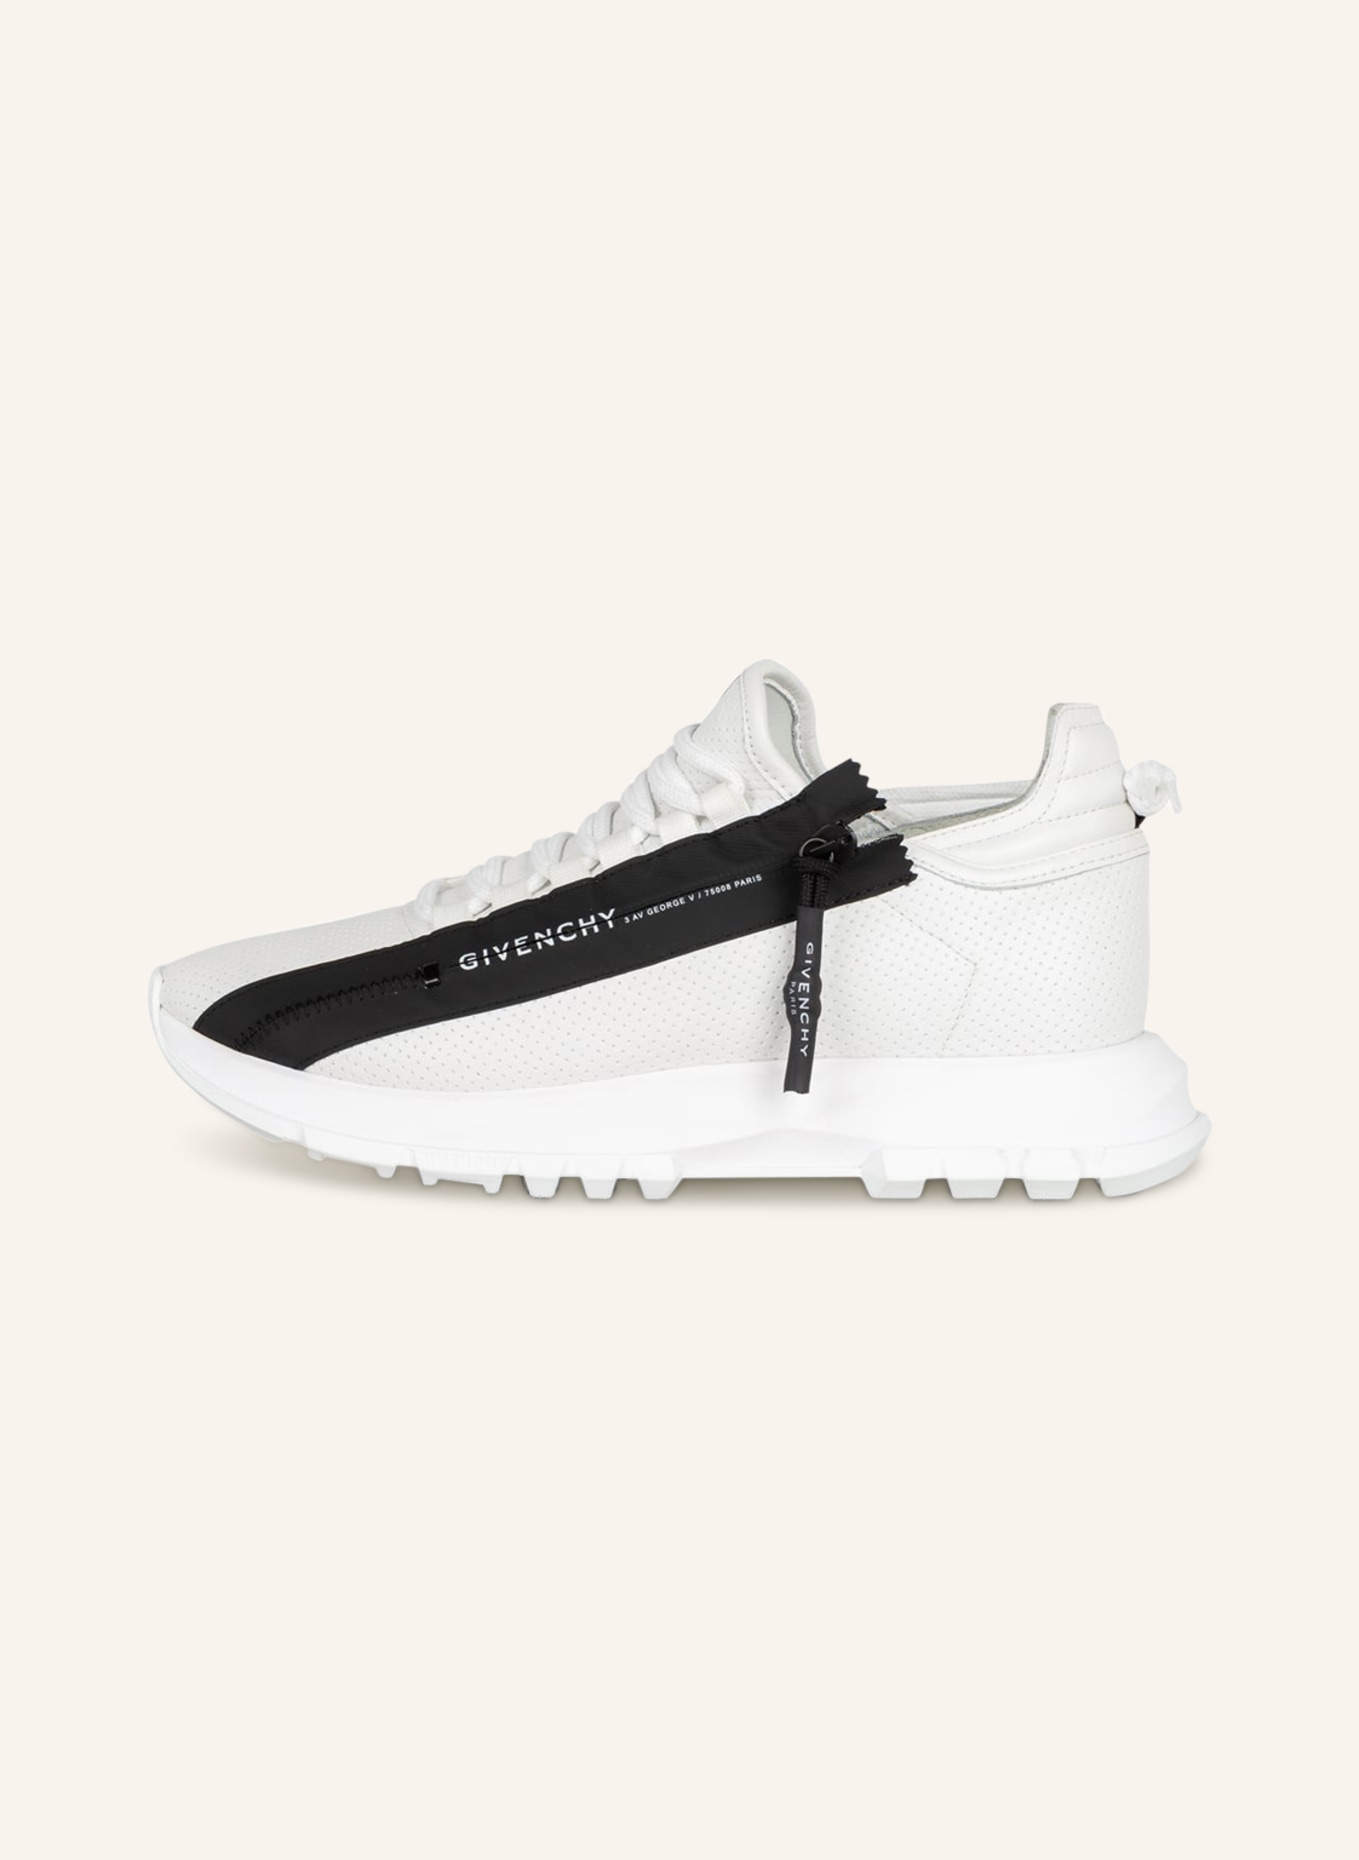 GIVENCHY Sneaker SPECTRE, Farbe: WEISS (Bild 4)